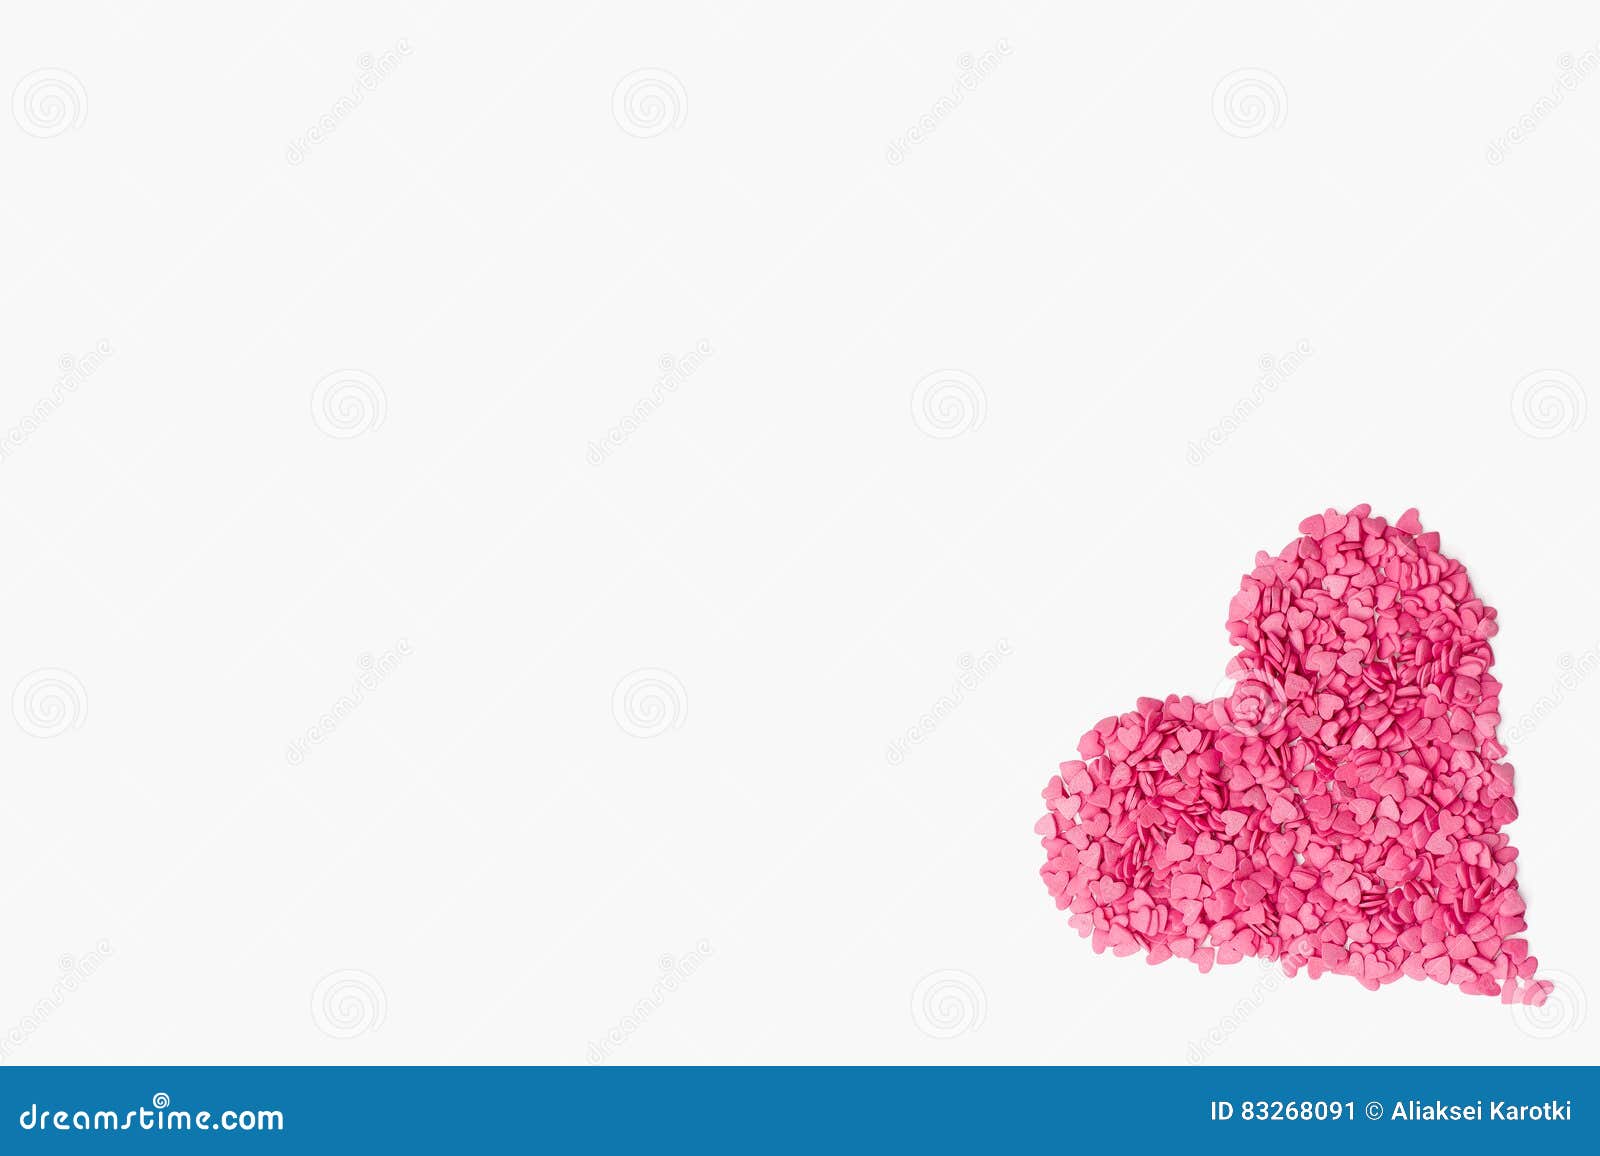 Observere Ejendommelige Definere 3,940 Heart Corner Photos - Free & Royalty-Free Stock Photos from Dreamstime